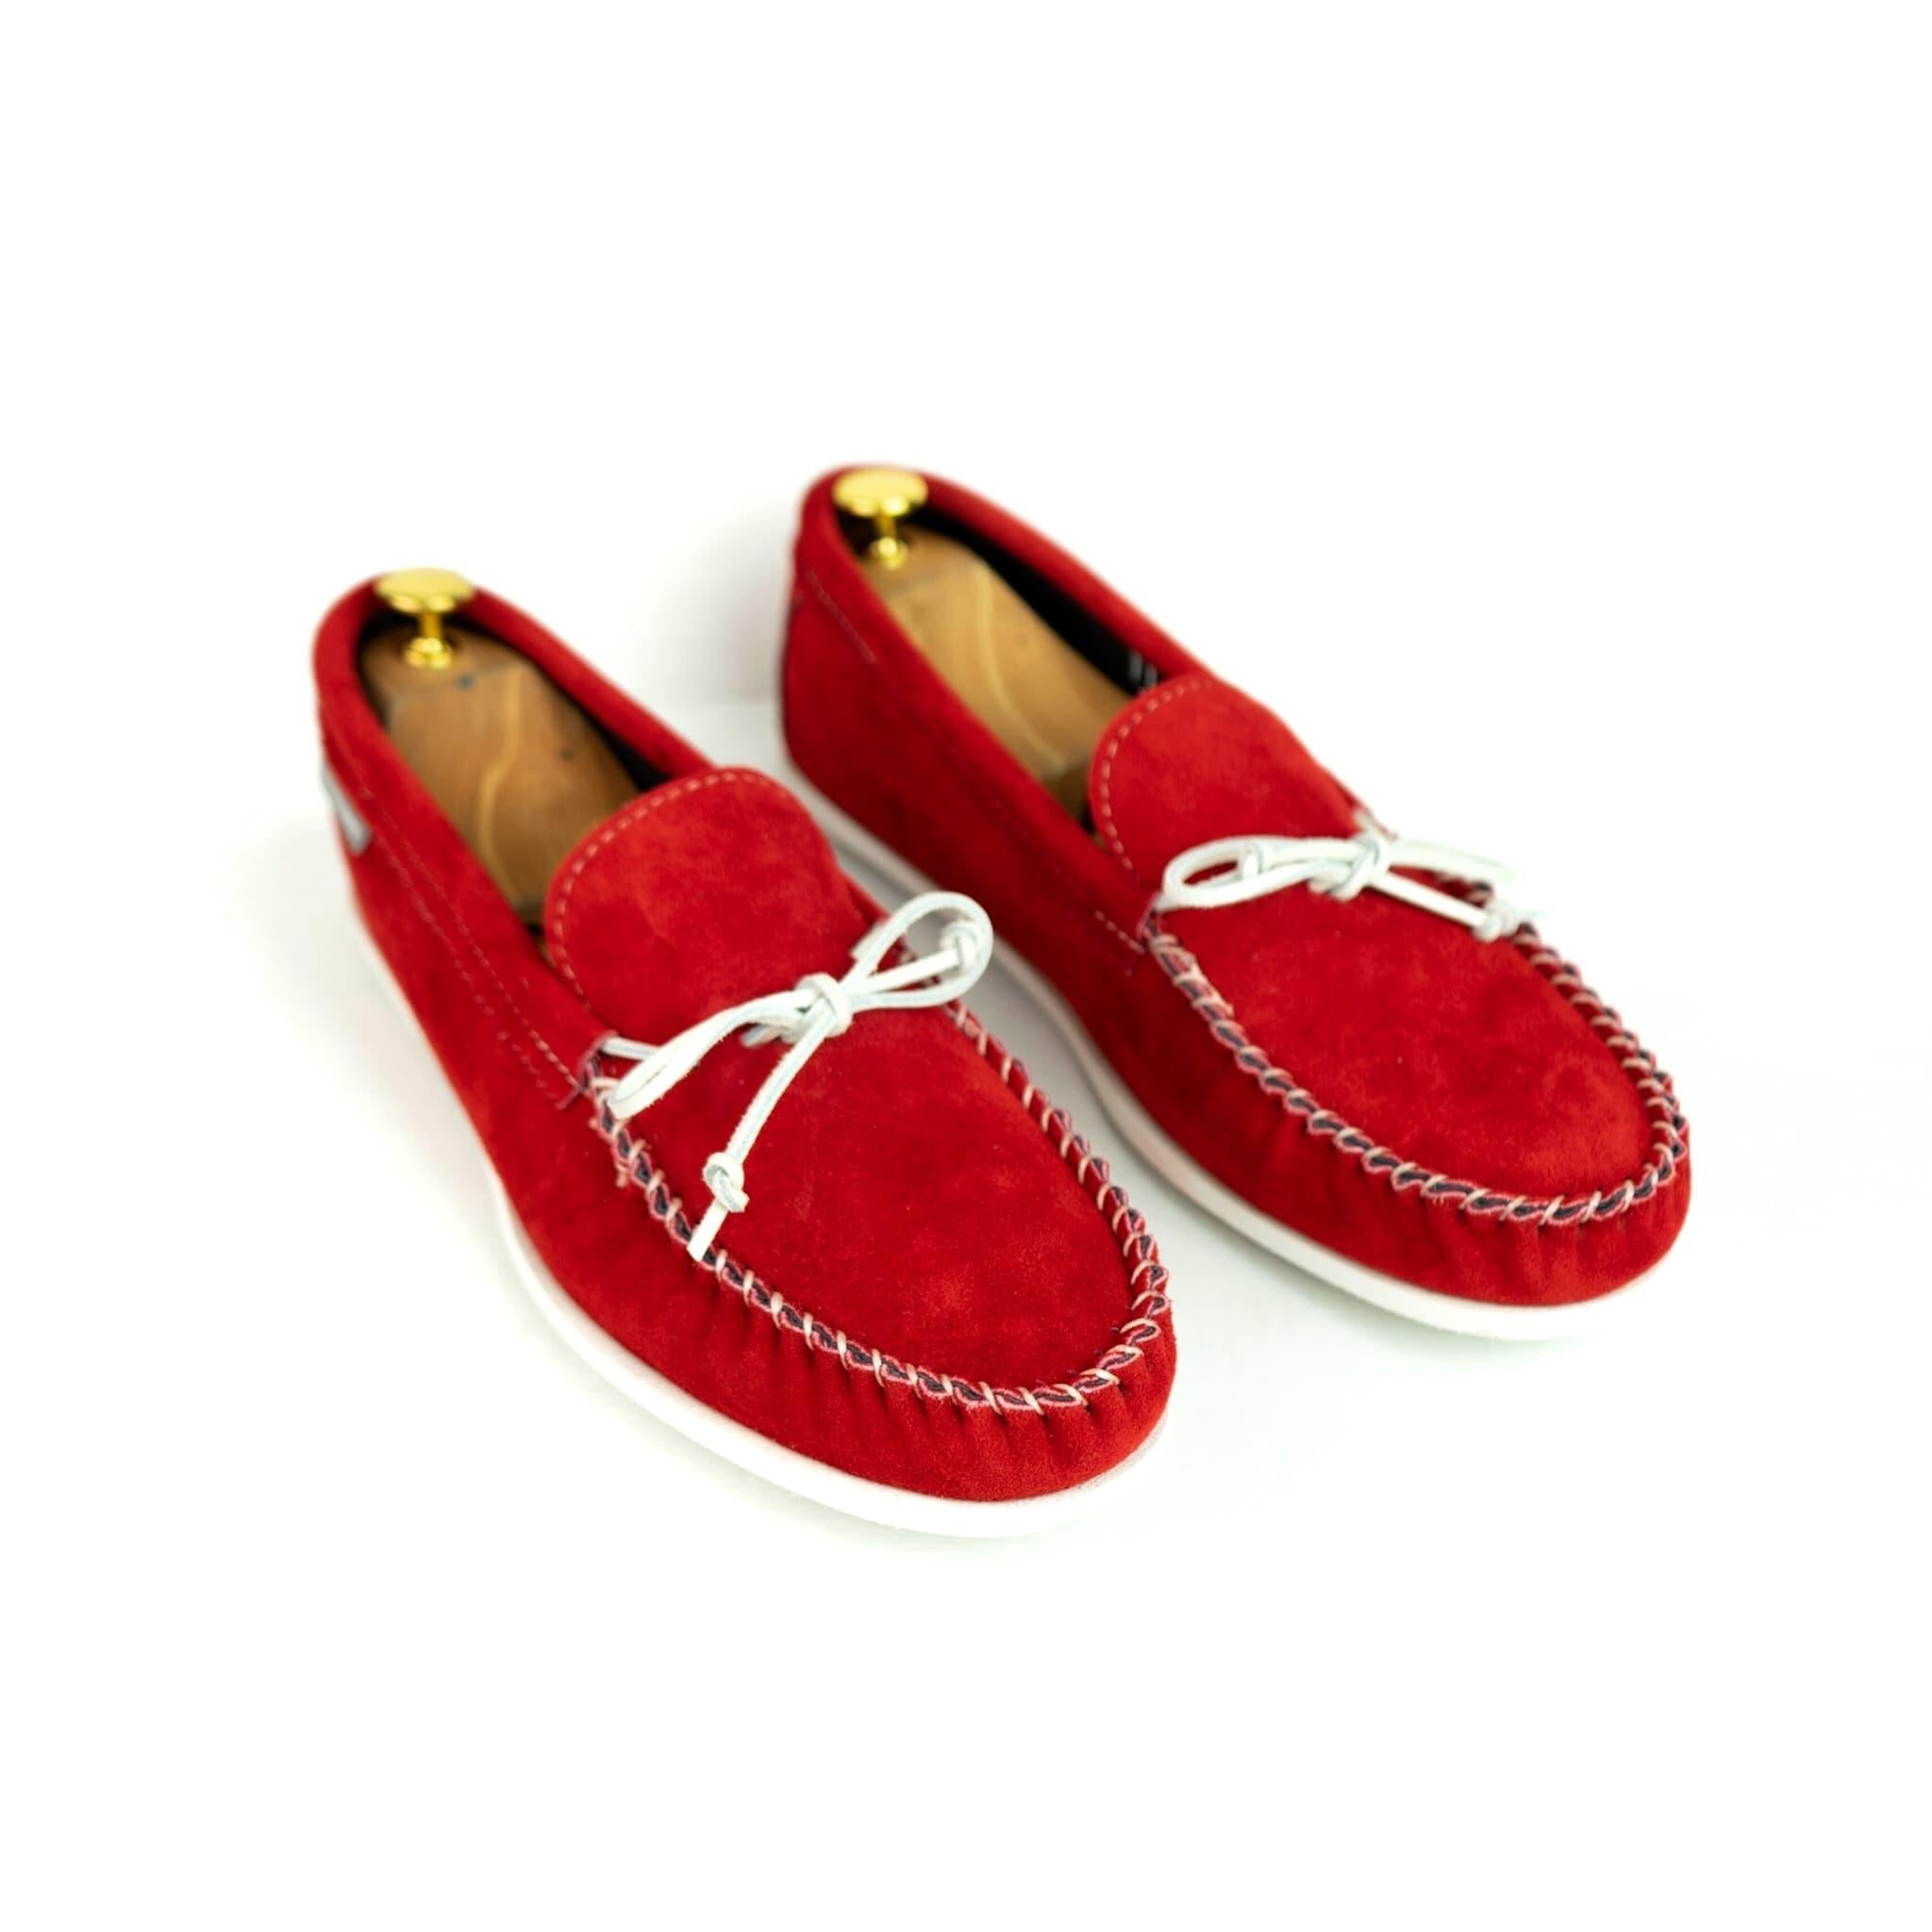 Spring Grove USA Moccasins - Red Suede – Kicks For Gents